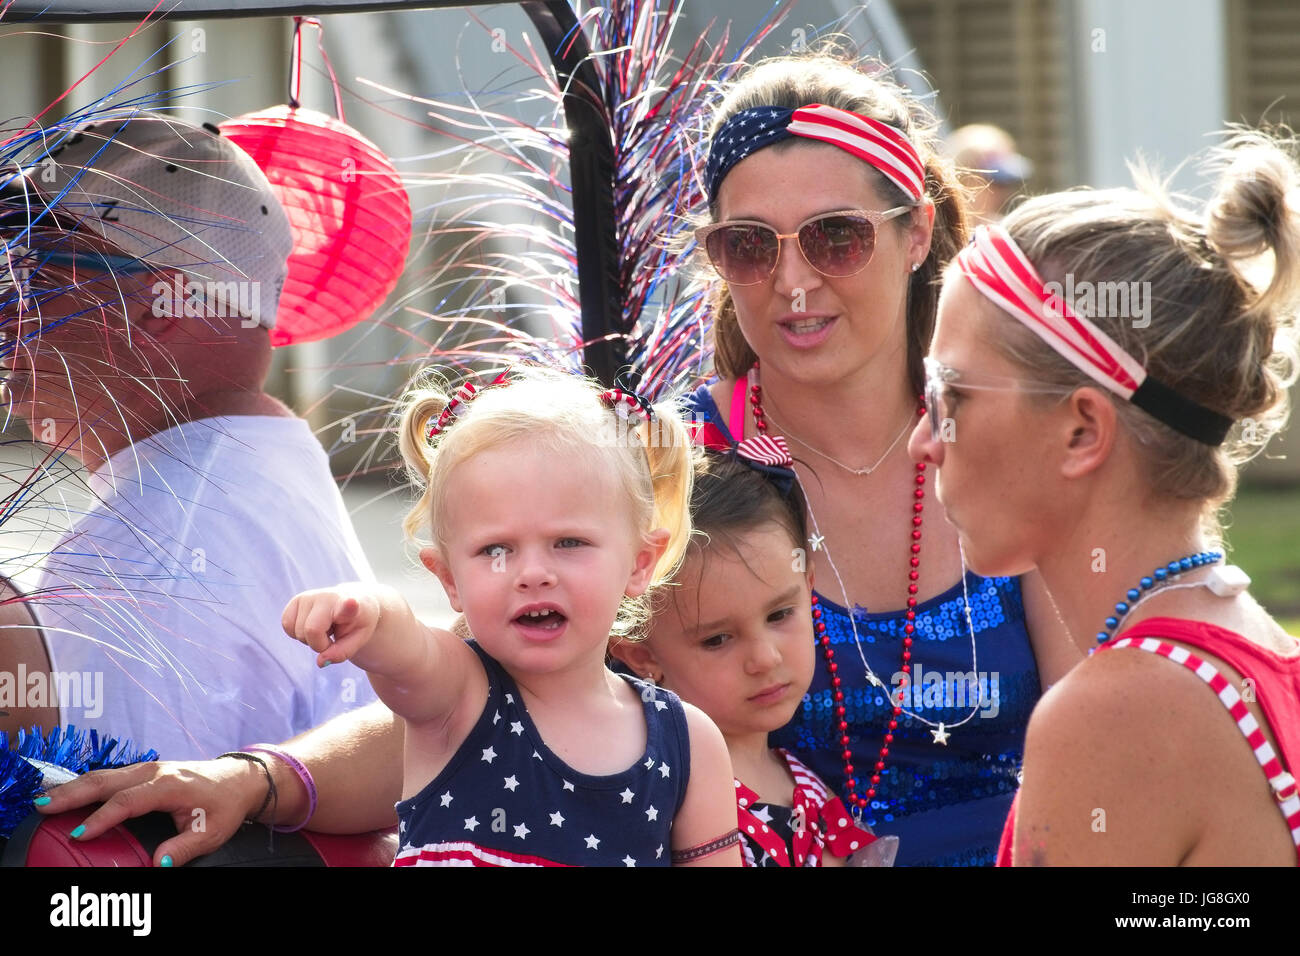 Sullivan's Island, South Carolina, USA. 4th July, 2017. A young family wearing patriotic costume during the annual Sullivan's Island Independence Day parade July 4, 2017 in Sullivan's Island, South Carolina. The tiny affluent sea island hosts a bicycle and golf cart parade through the historic village. Credit: Planetpix/Alamy Live News Stock Photo